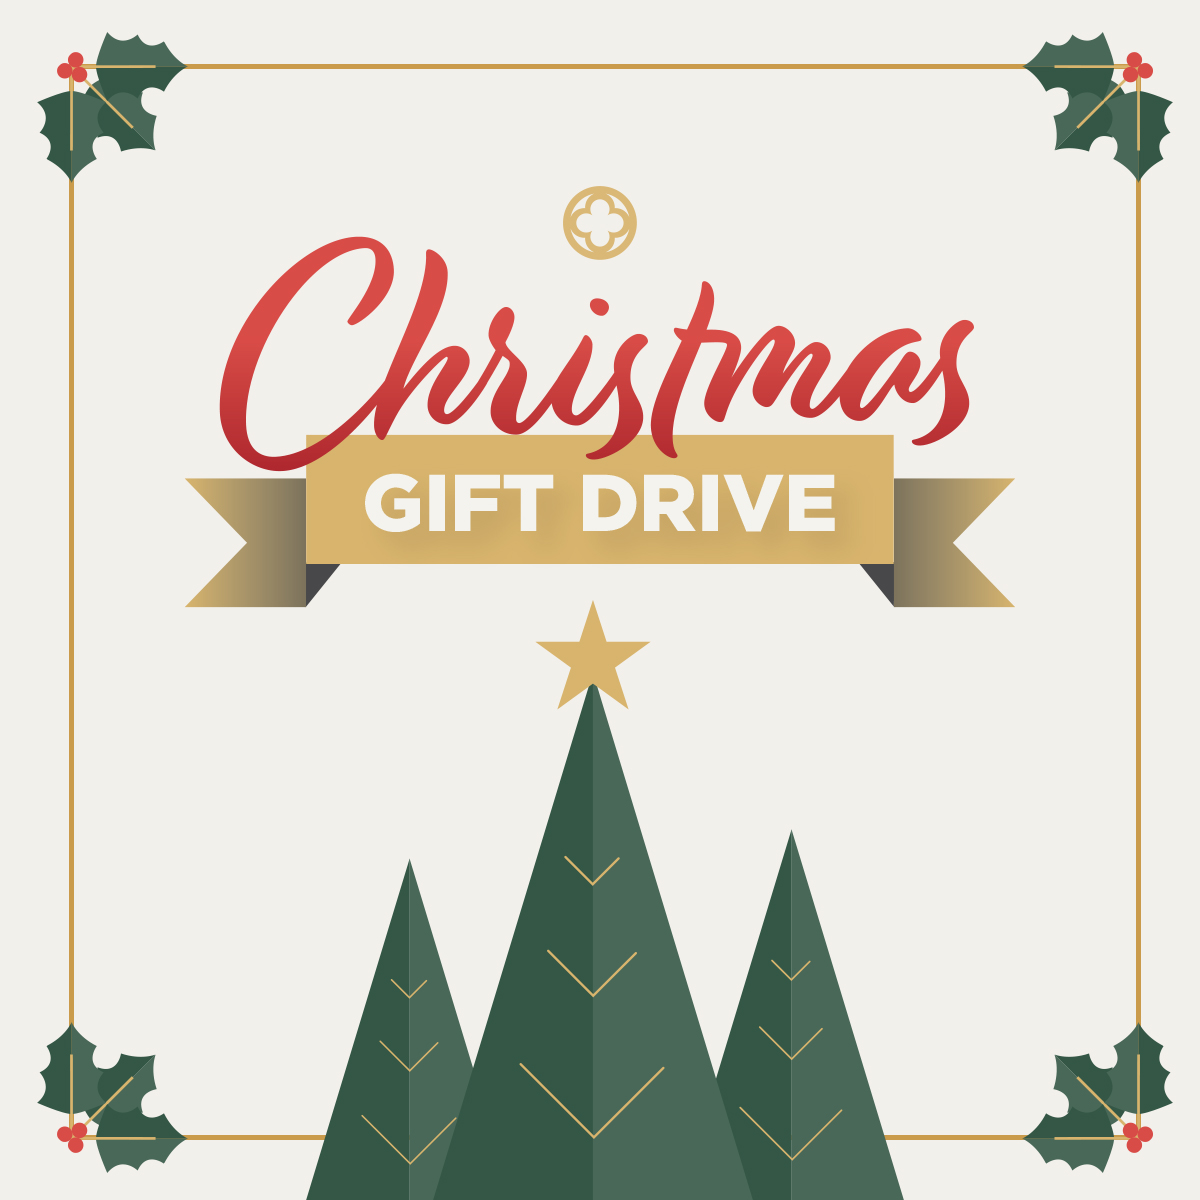 Want an easy way to give back on this #GivingTuesday? Donate to our Christmas gift drive and help bring Christmas joy to Dallas area residents! hpumc.org/gift-drive